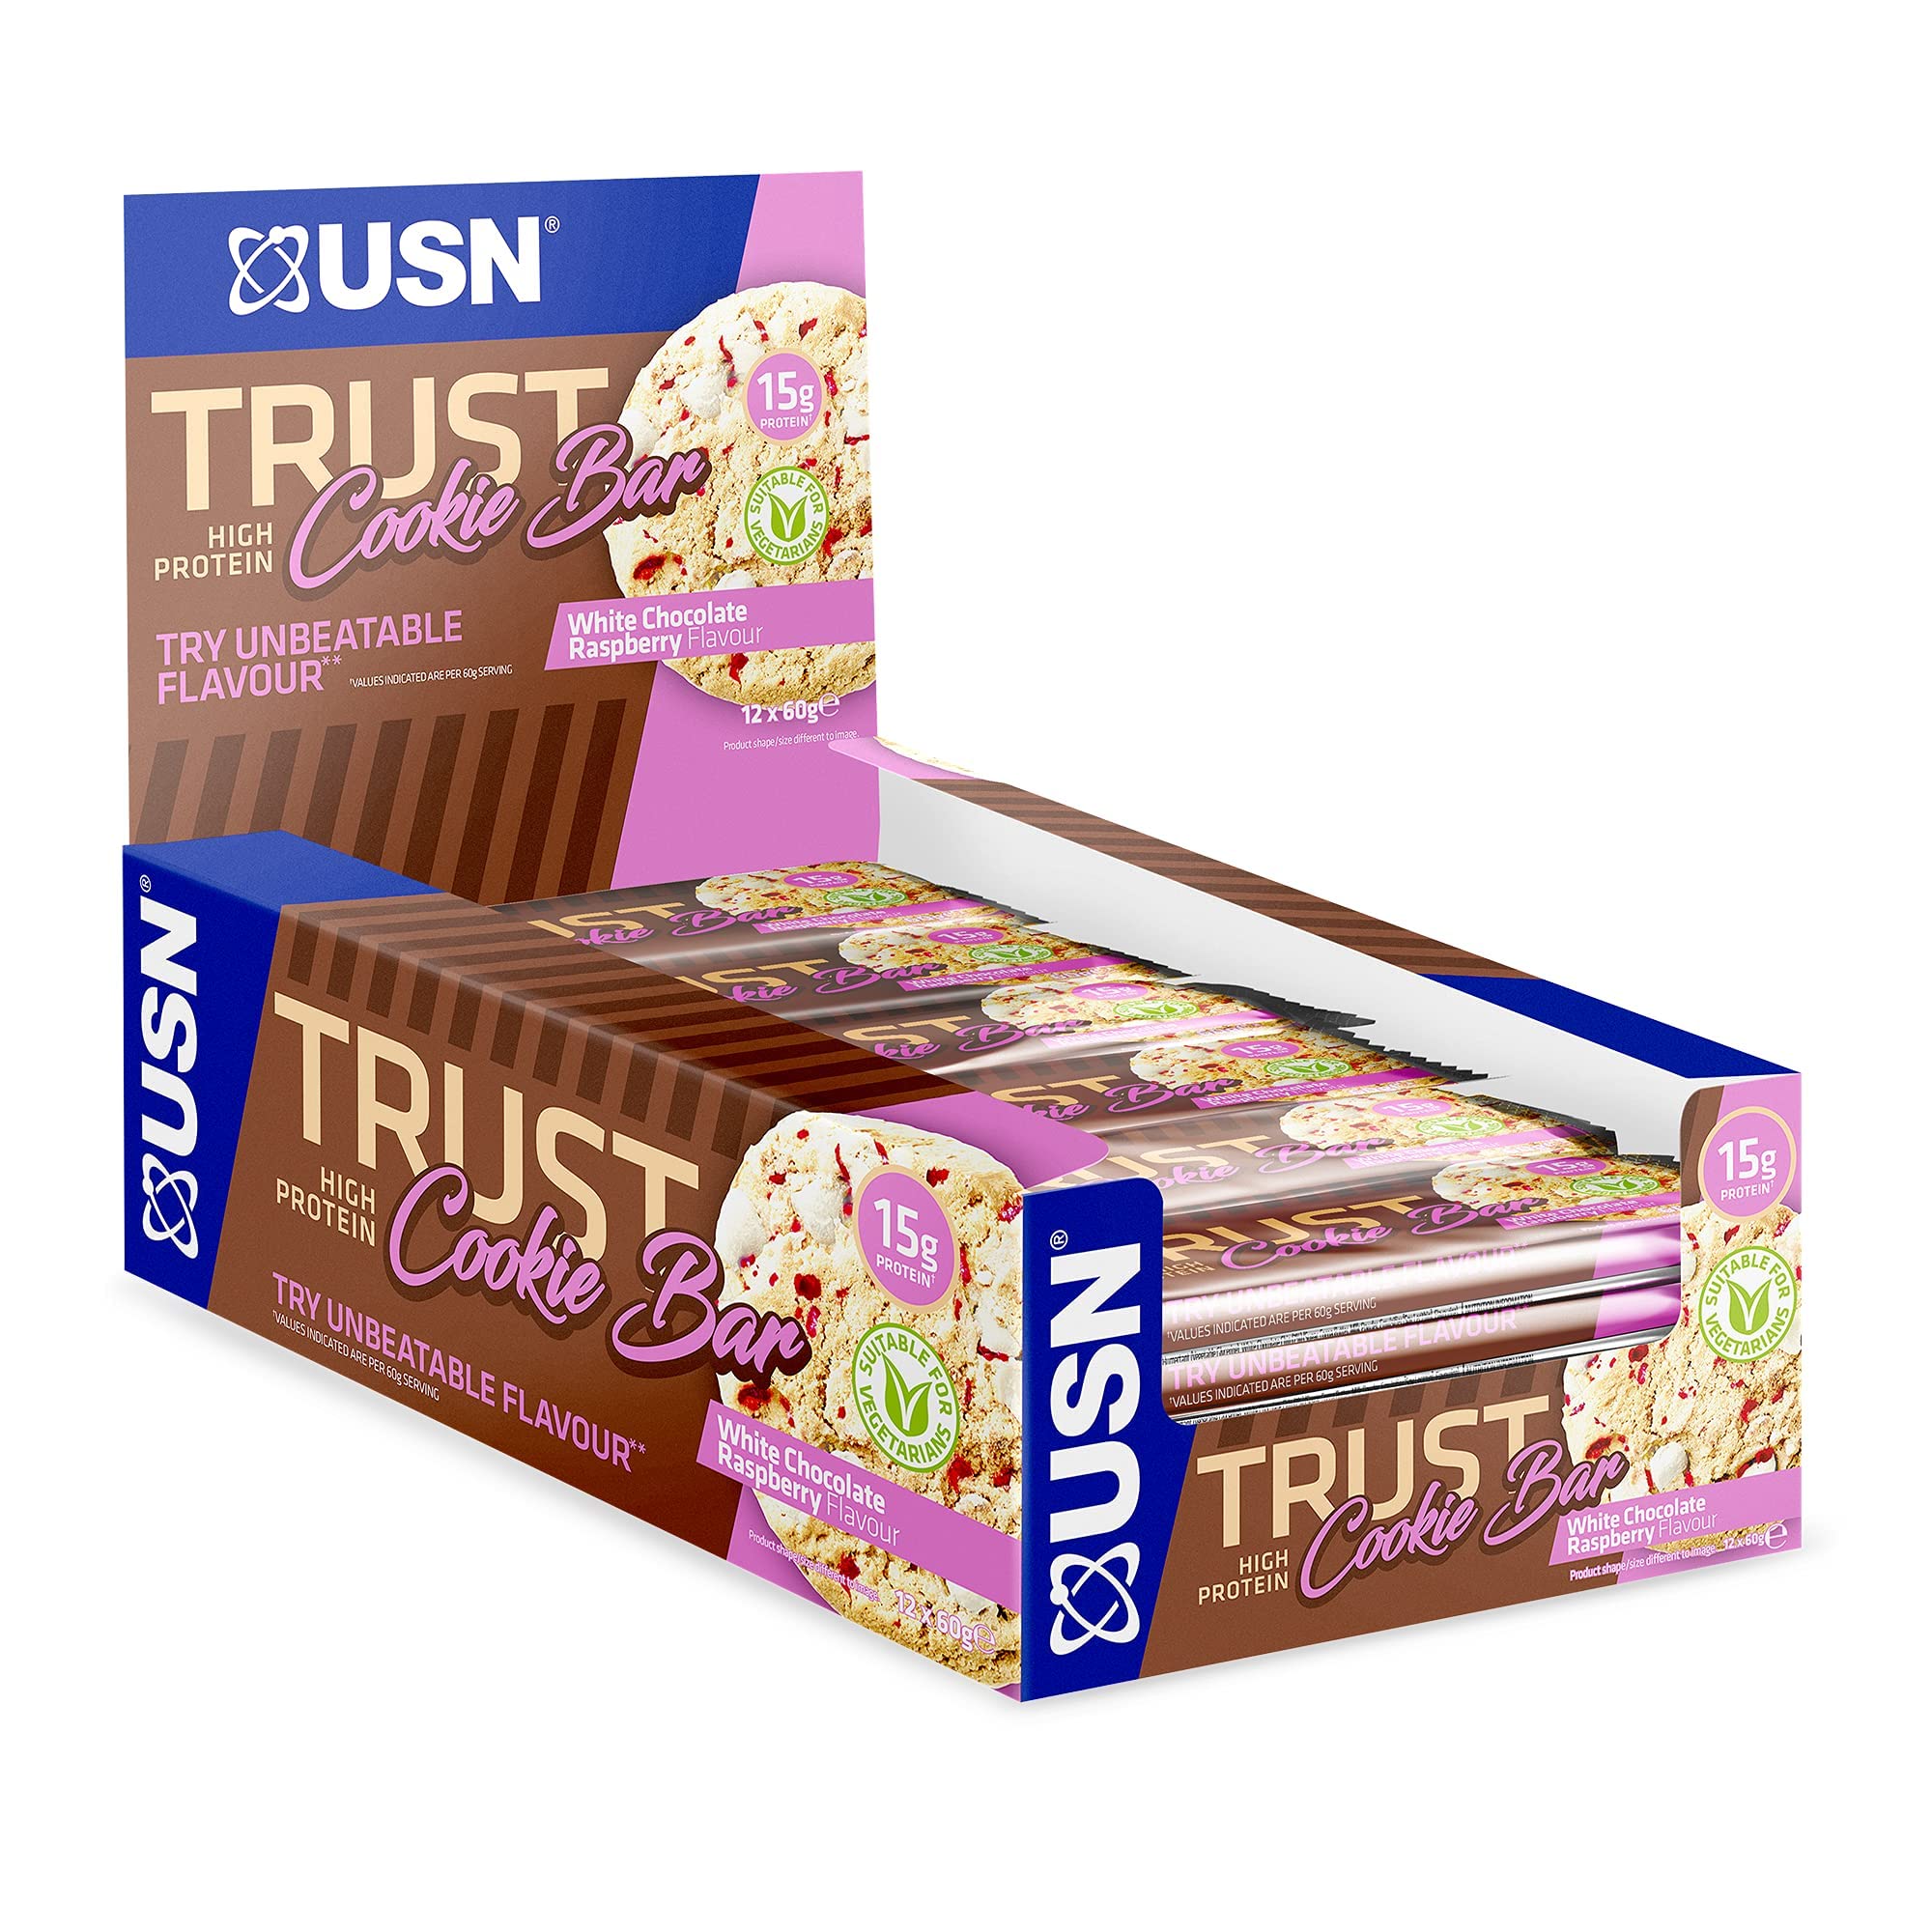 USN Trust Cookie Bar, White Chocolate & Raspberry Protein Cookie: High Protein Bars, Perfect On-the-Go & Post-Workout Protein Snacks (12 x 60g Bars per Pack)